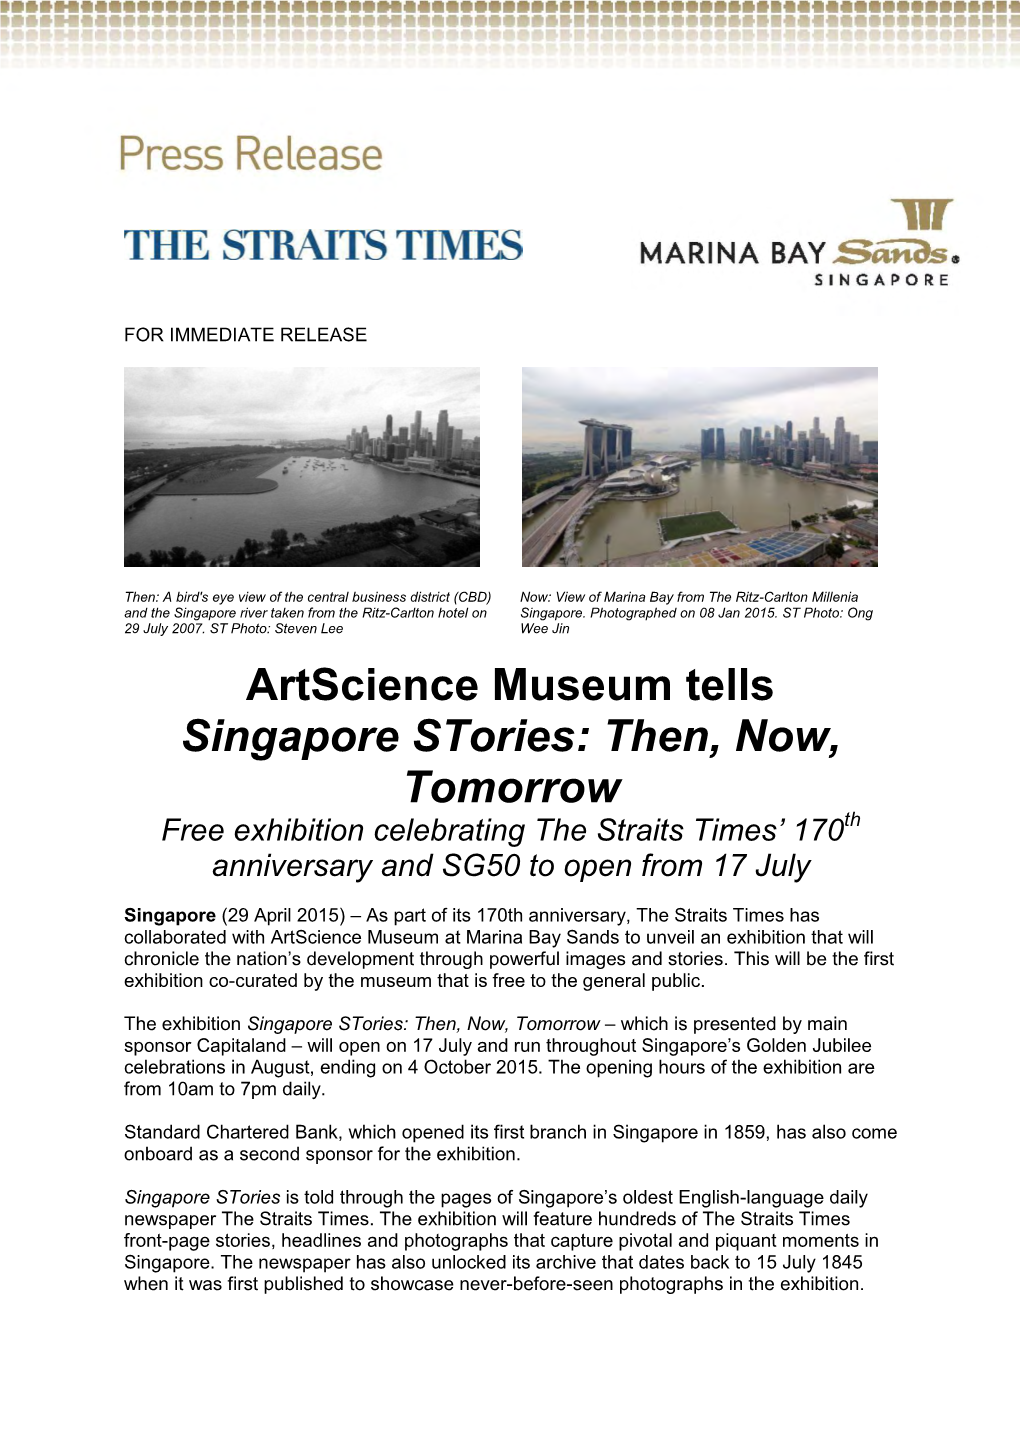 Artscience Museum Tells Singapore Stories: Then, Now, Tomorrow Free Exhibition Celebrating the Straits Times’ 170Th Anniversary and SG50 to Open from 17 July